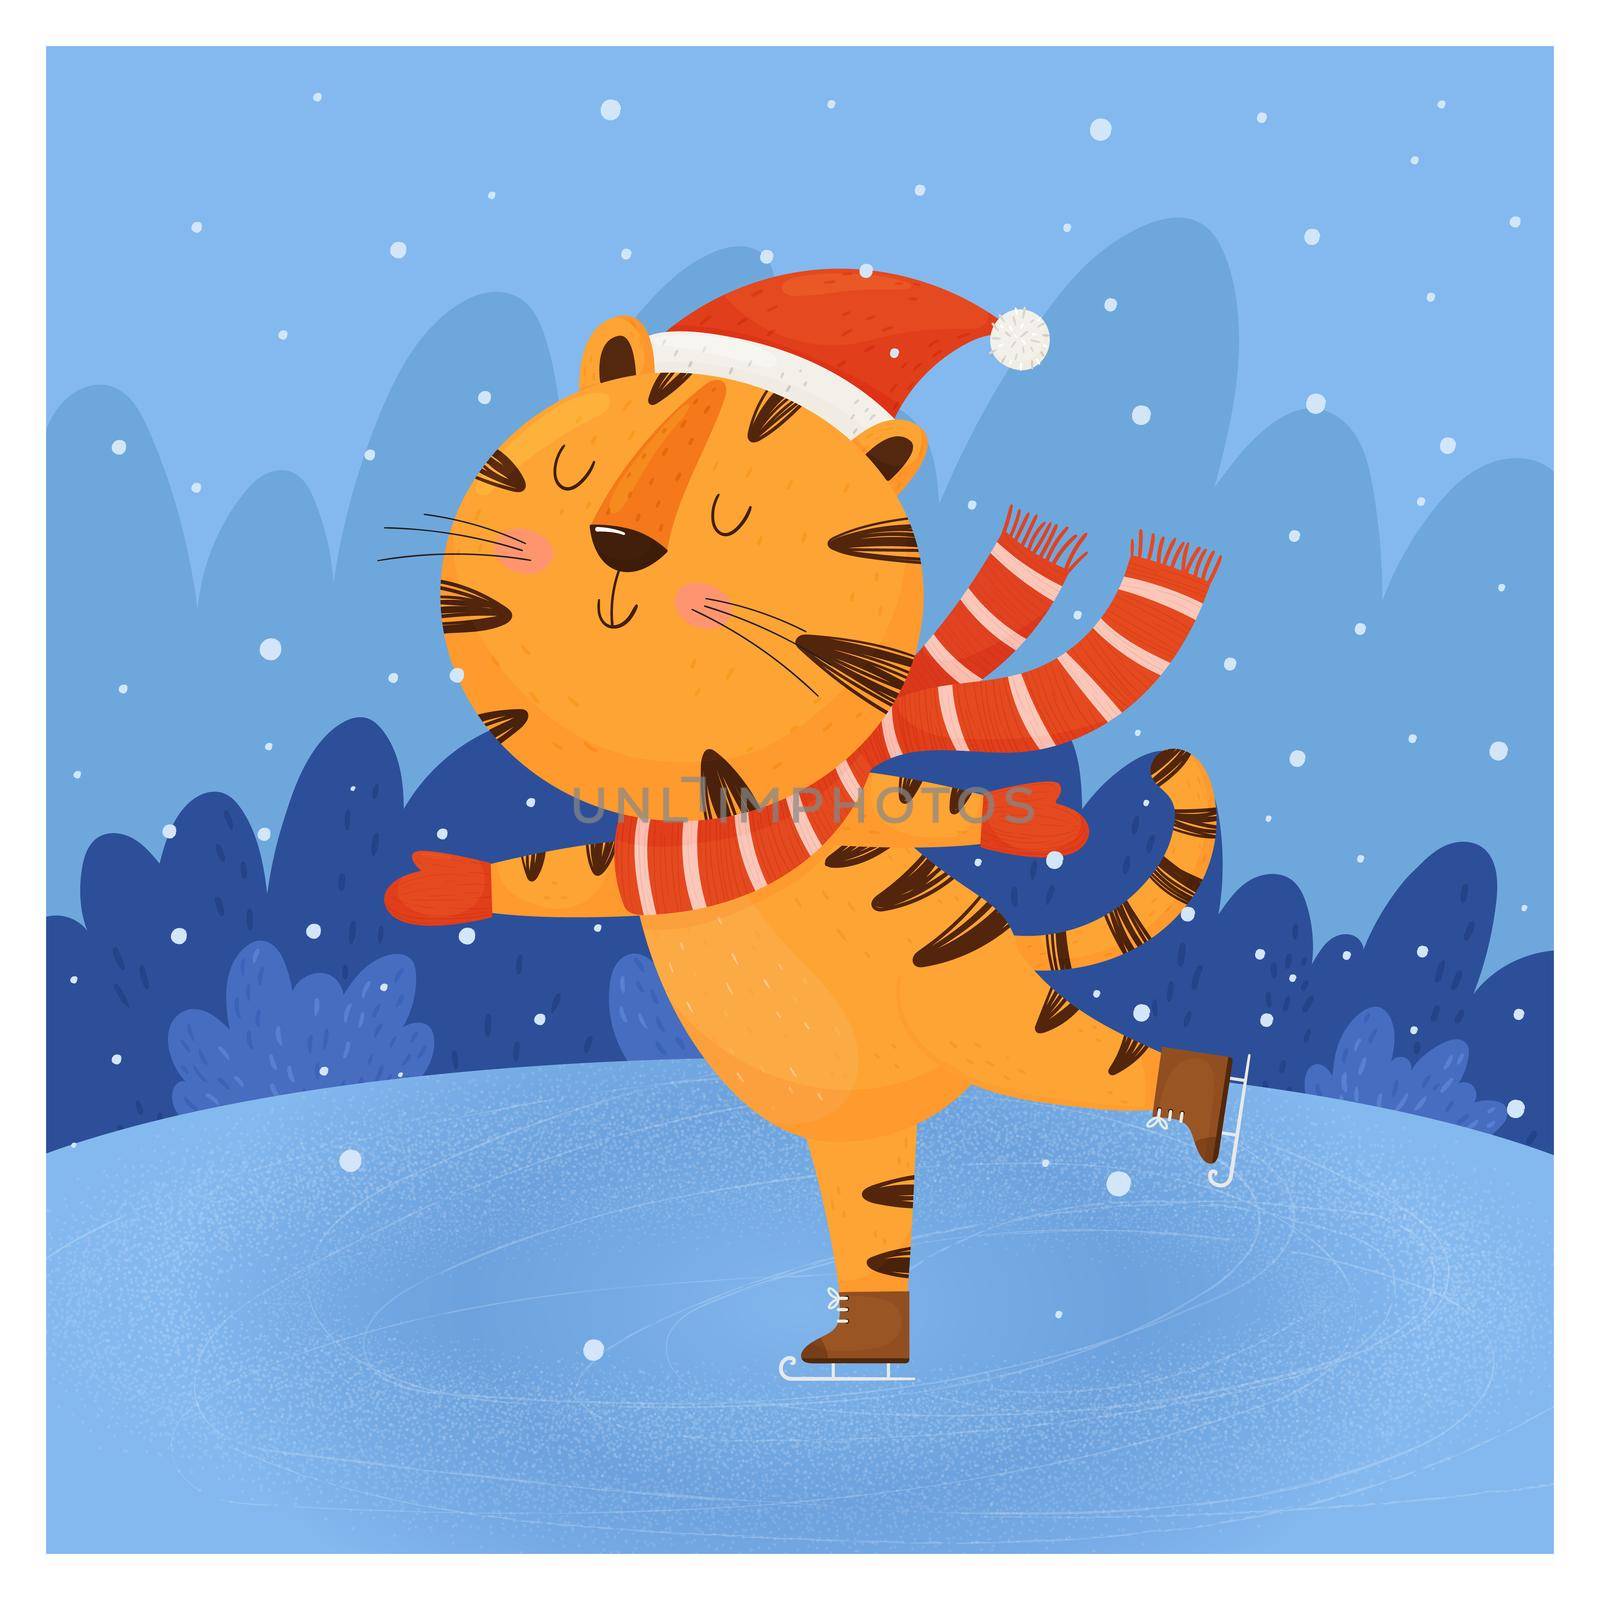 Greeting card template with funny ice skating tiger. Vector illustration in children's cartoon style. Colorful design for Christmas and New Year holidays.